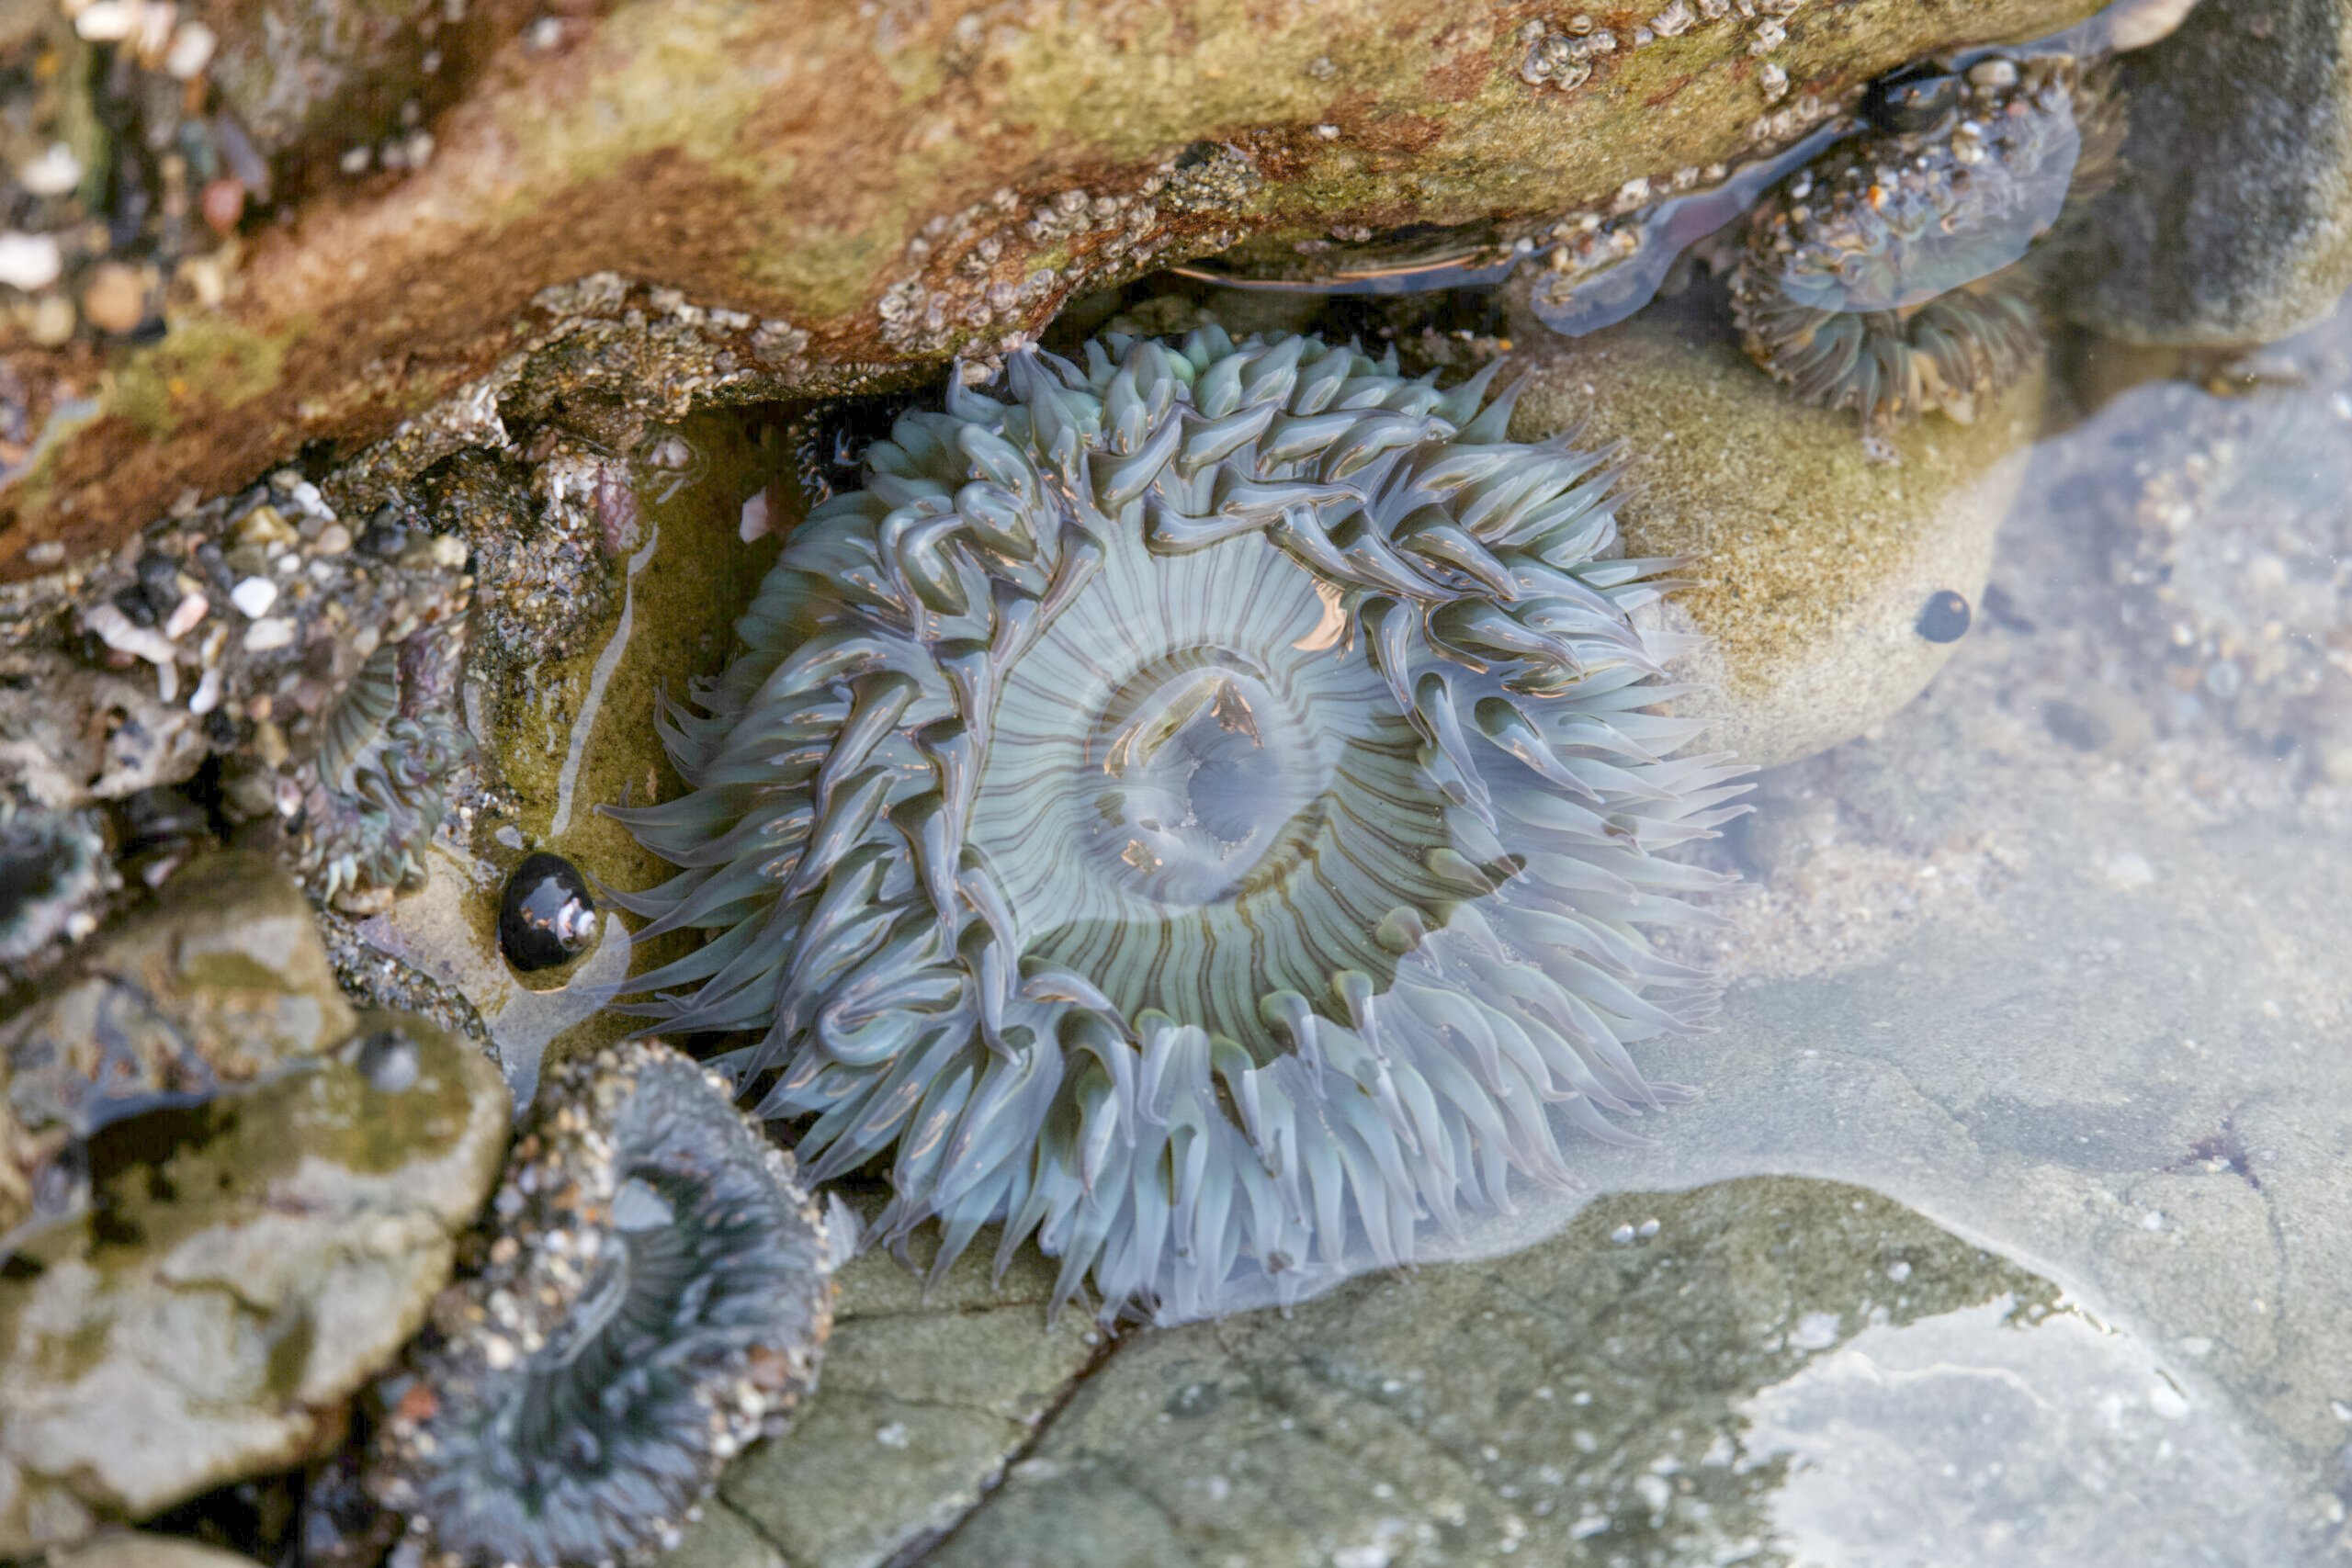 Close-up of a sea anemone with delicate blue and green tentacles in a tidal pool at Malibu Beach, California.